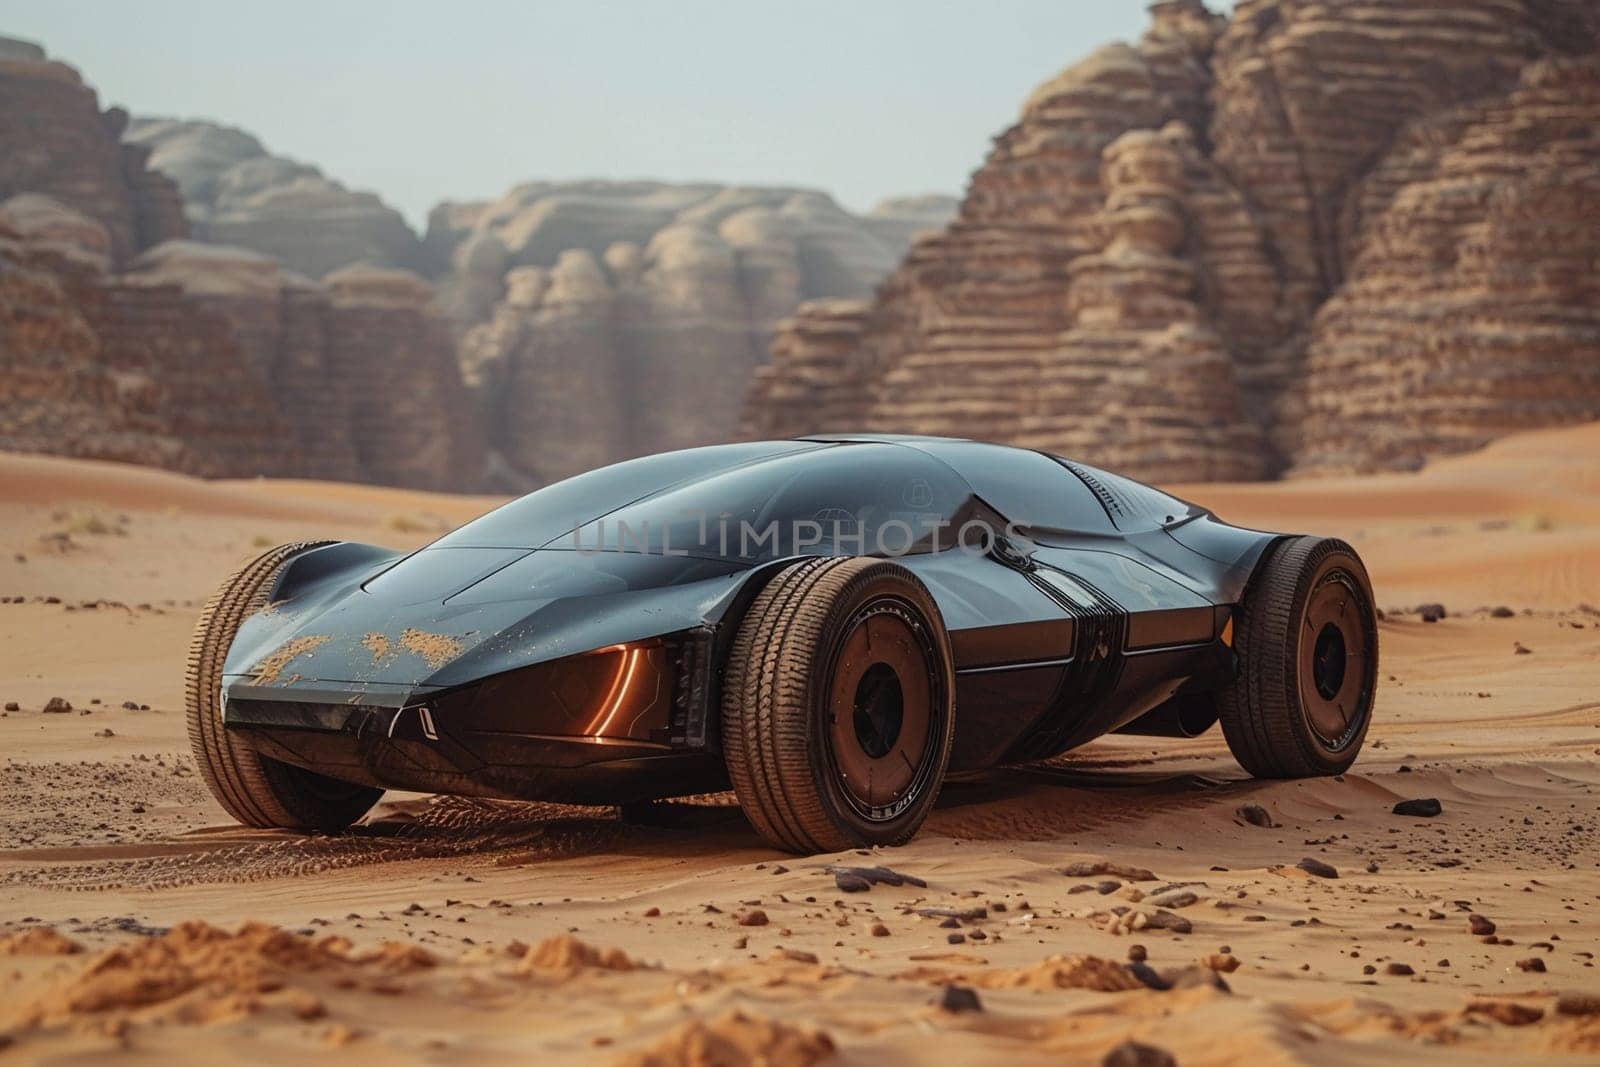 Eco-friendly transportation concept with futuristic solar-powered electric car exploring mountainous desert terrain, showcasing innovation and sustainability